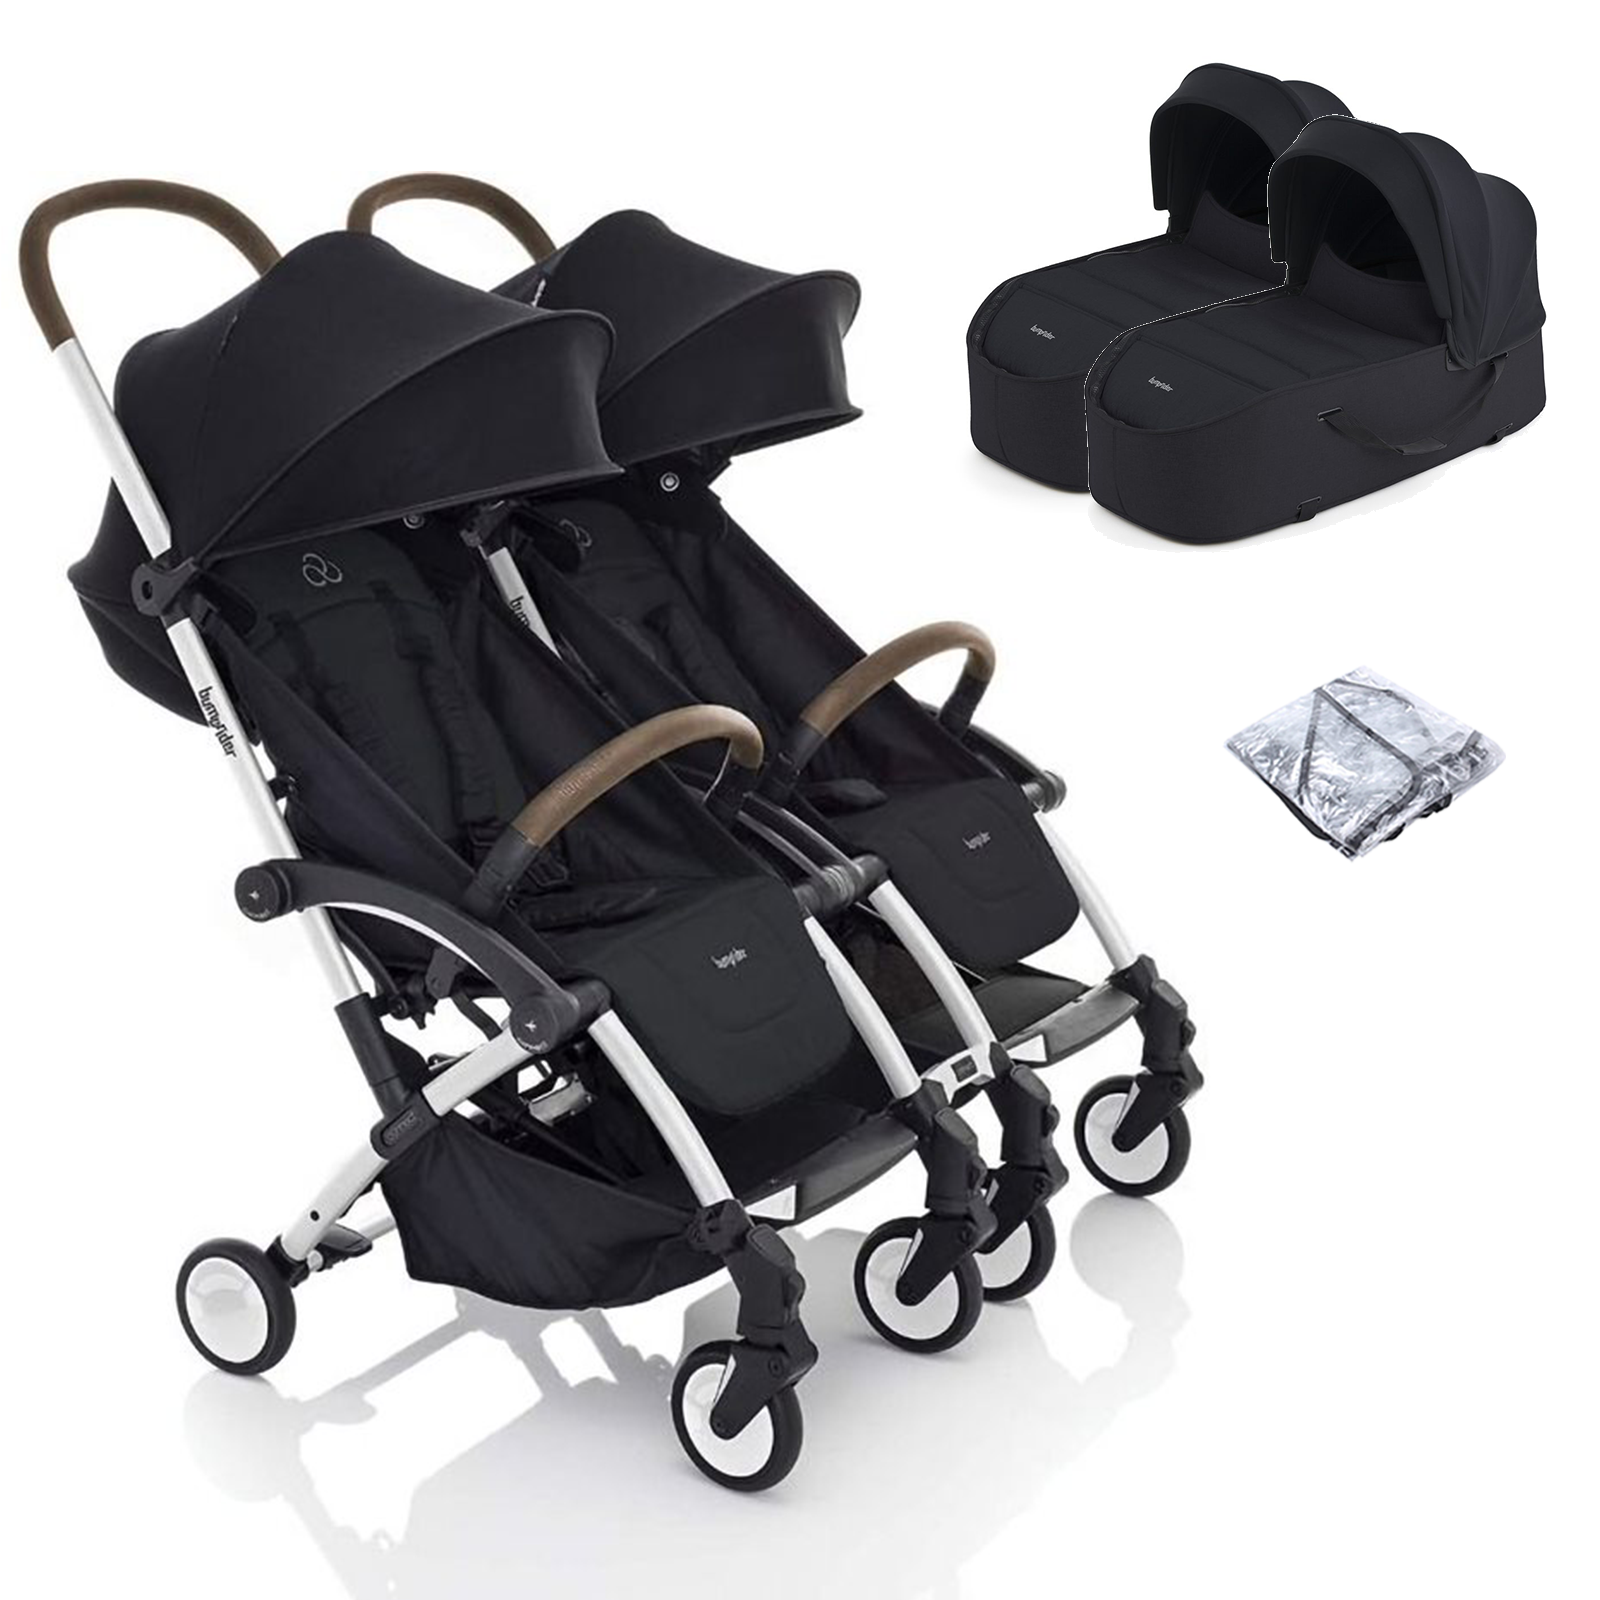 Bumprider Connect2 Double Stroller with Carrycot - White & Black